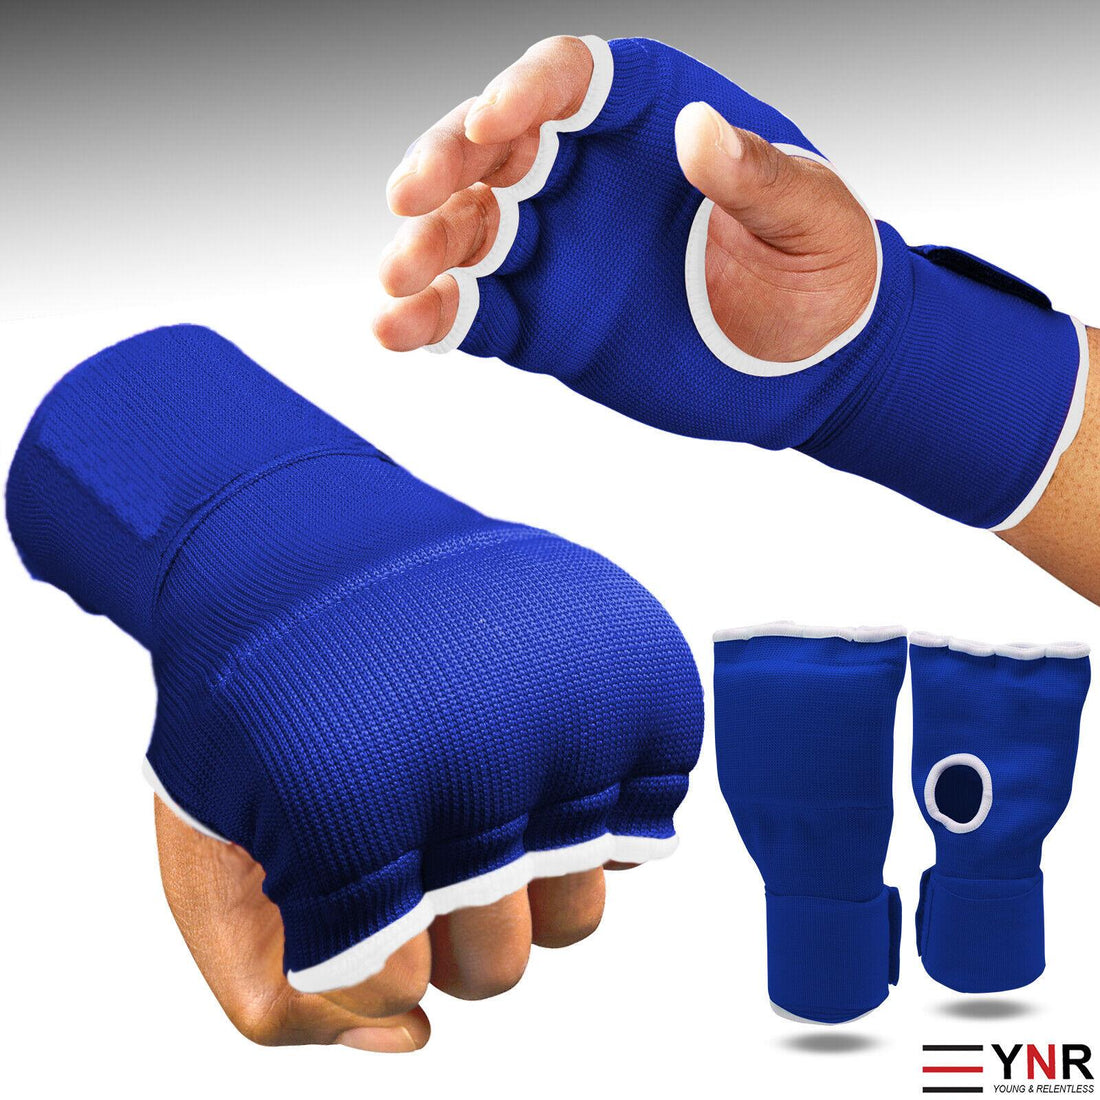 YNR Gel Gloves Boxing Padded Inner Punch Bag Hand Quick Wraps UFC Gear MMA Protector